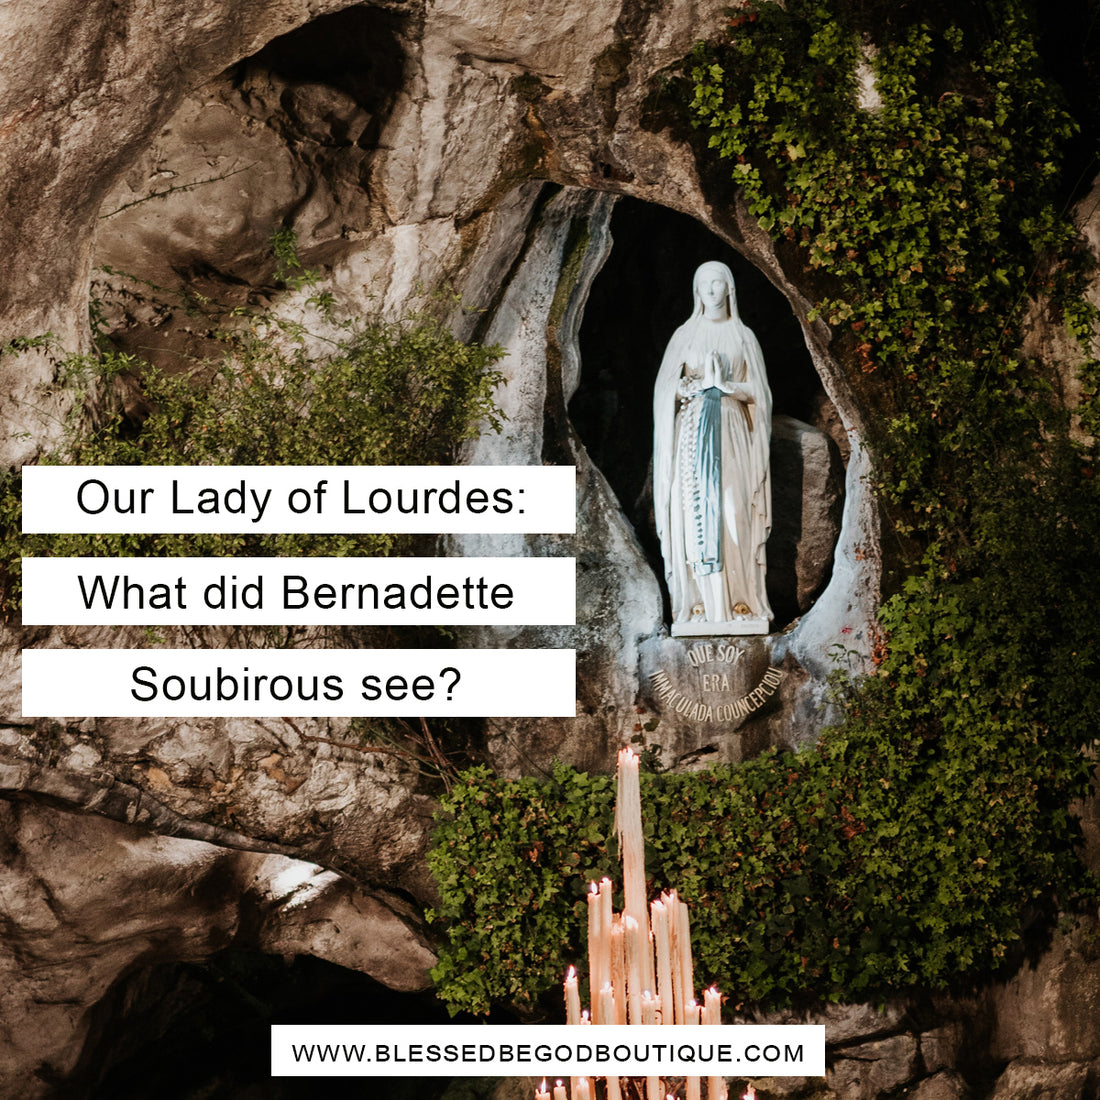 Our Lady of Lourdes: What did Bernadette Soubirous see?